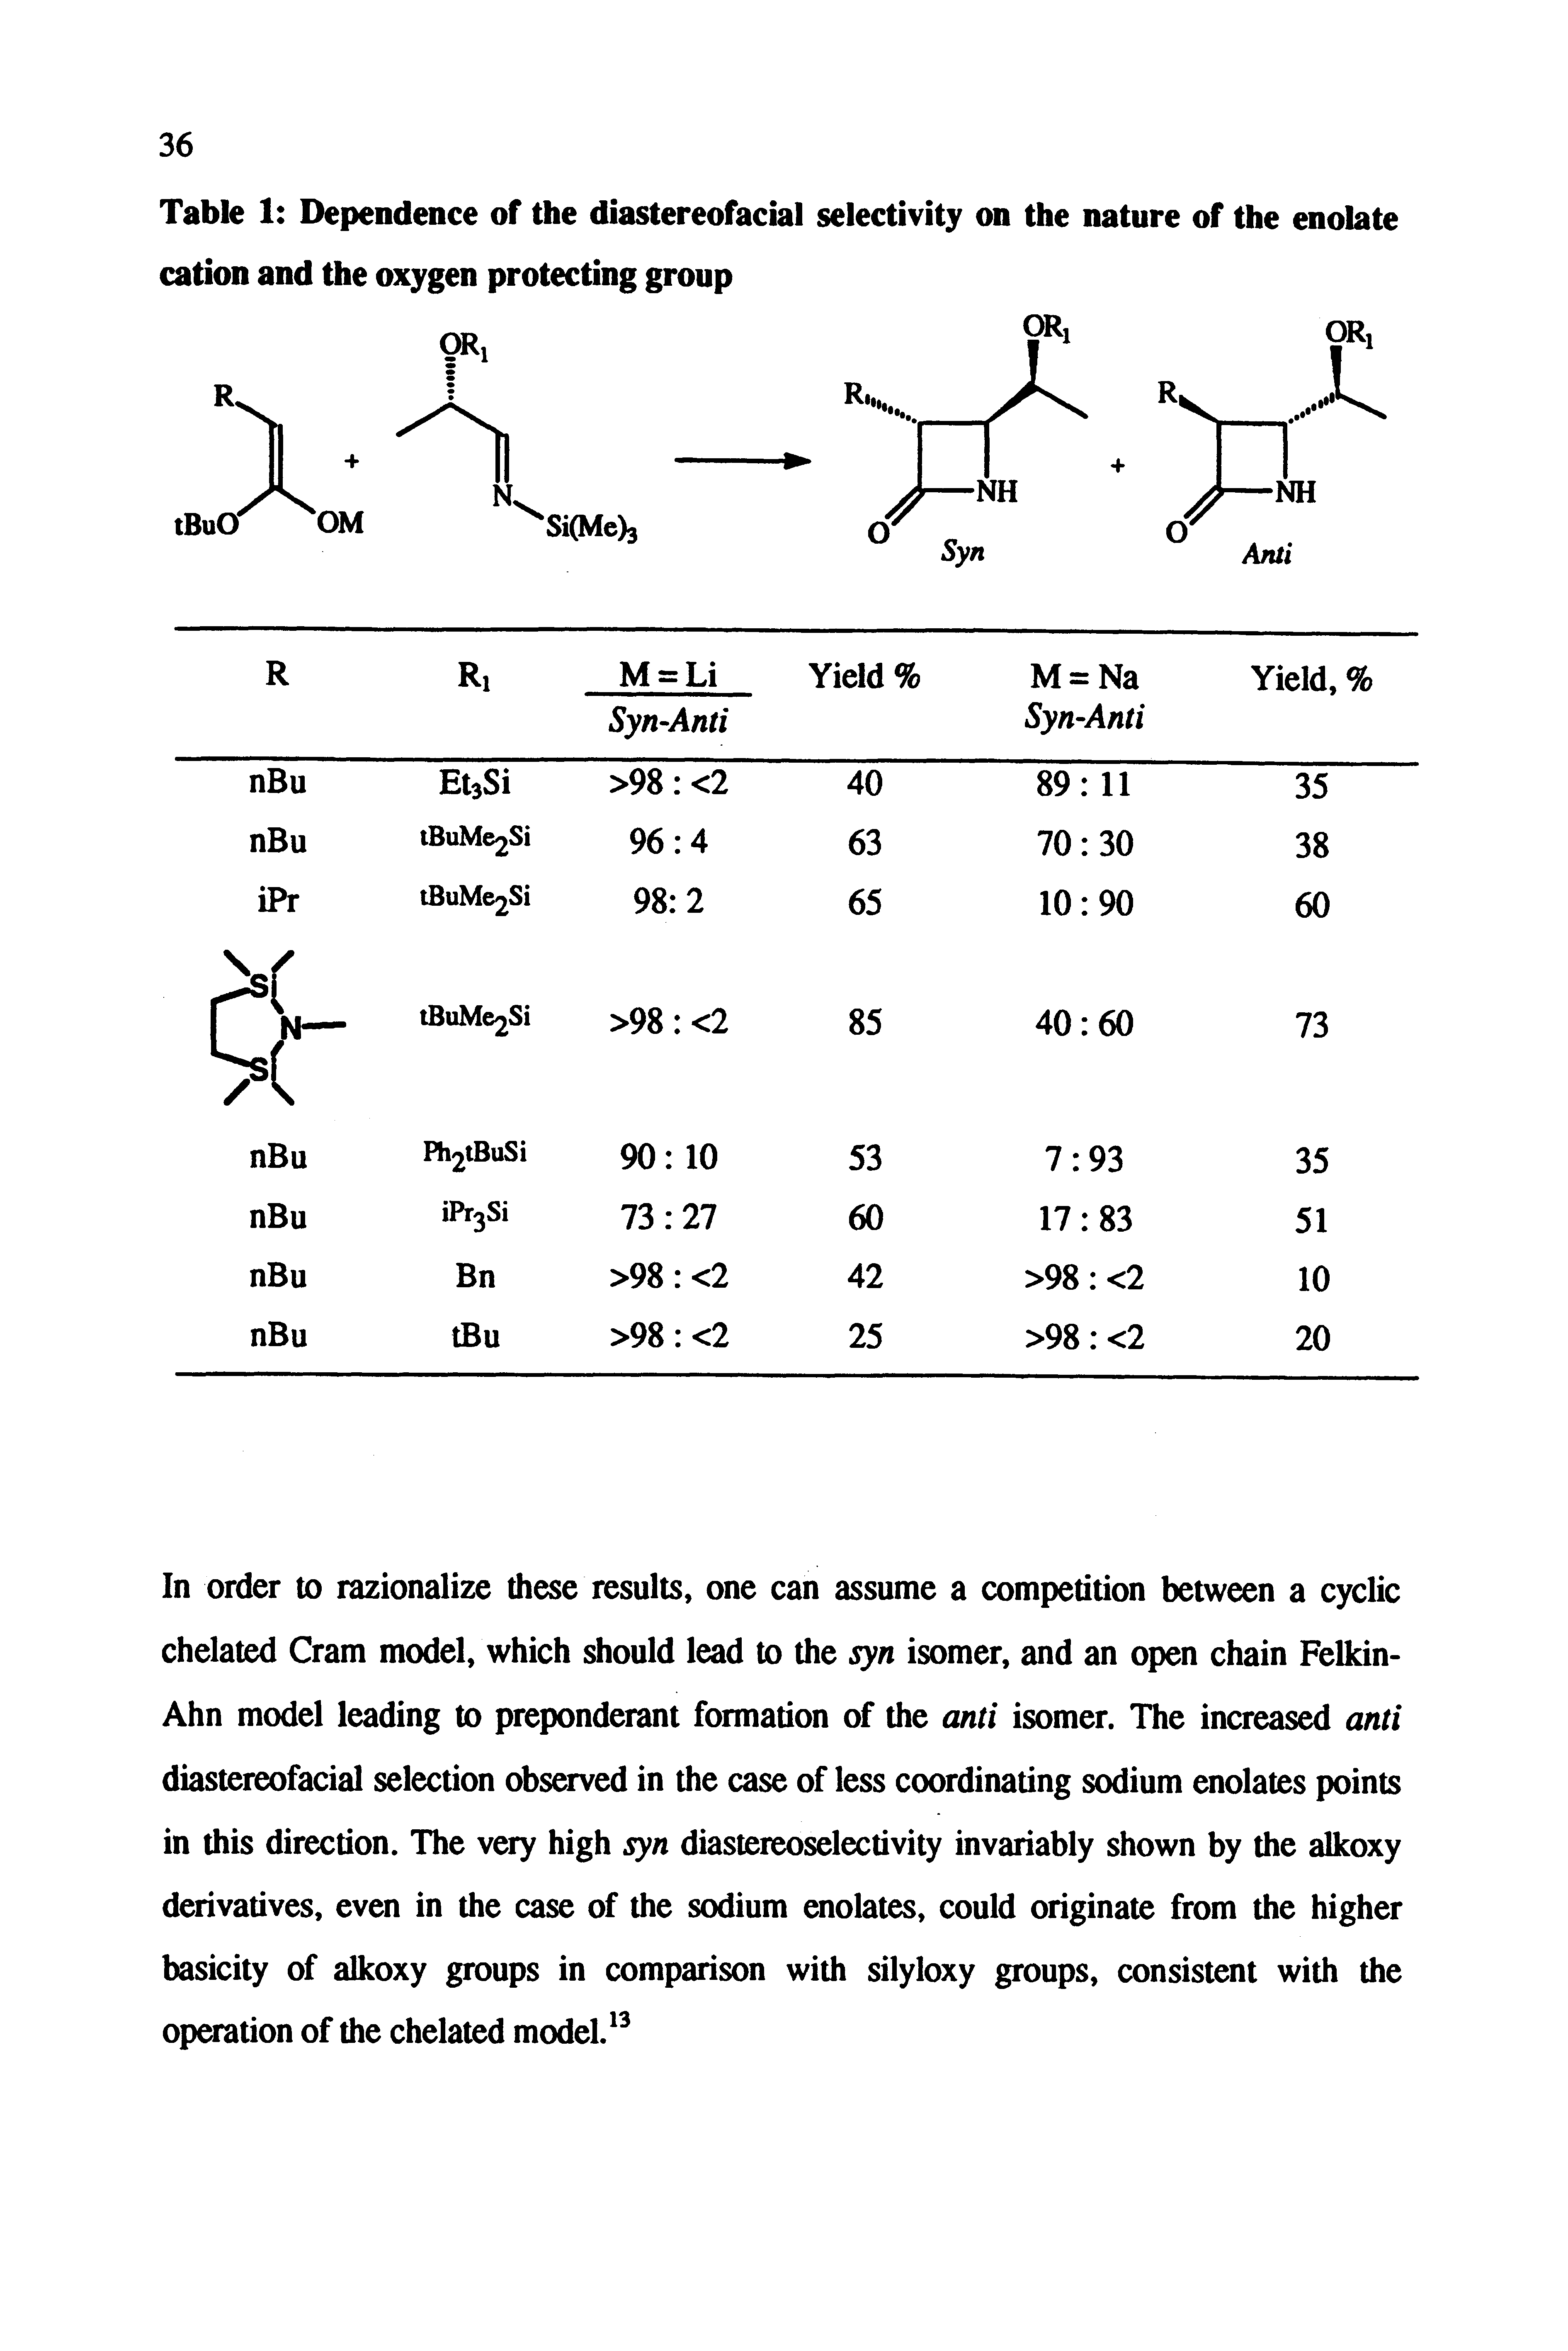 Table 1 Dependence of the diastereofacial selectivity on the nature of the enolate cation and the oxygen protecting group...